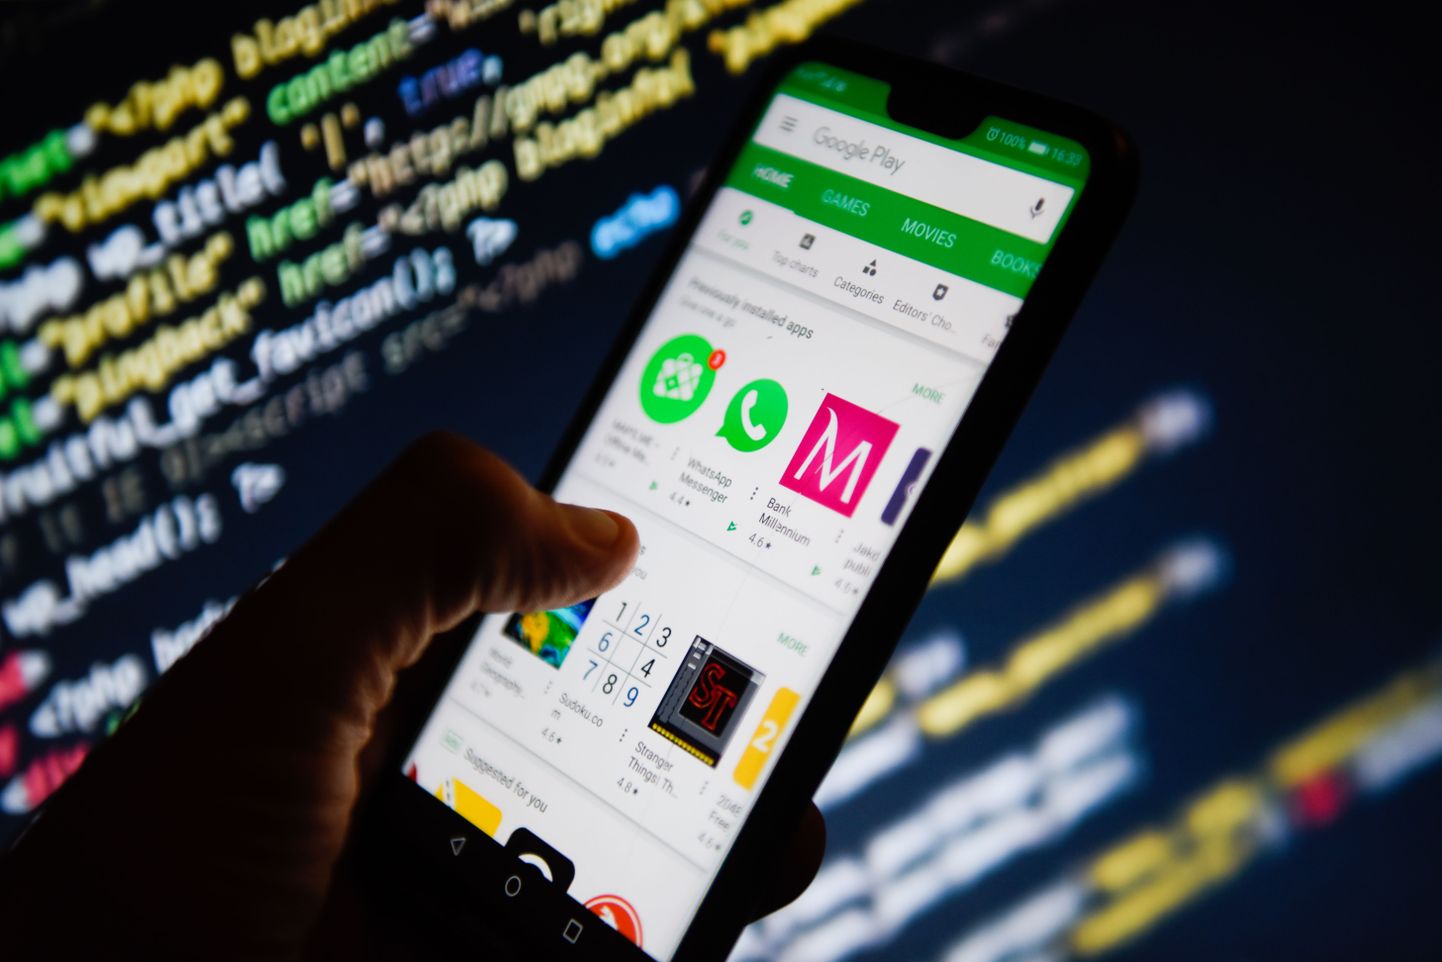 November 27, 2018 - Krakow, Poland - Google Play Store app is seen on an android mobile phone. (Credit Image: © Omar Marques/SOPA Images via ZUMA Wire)